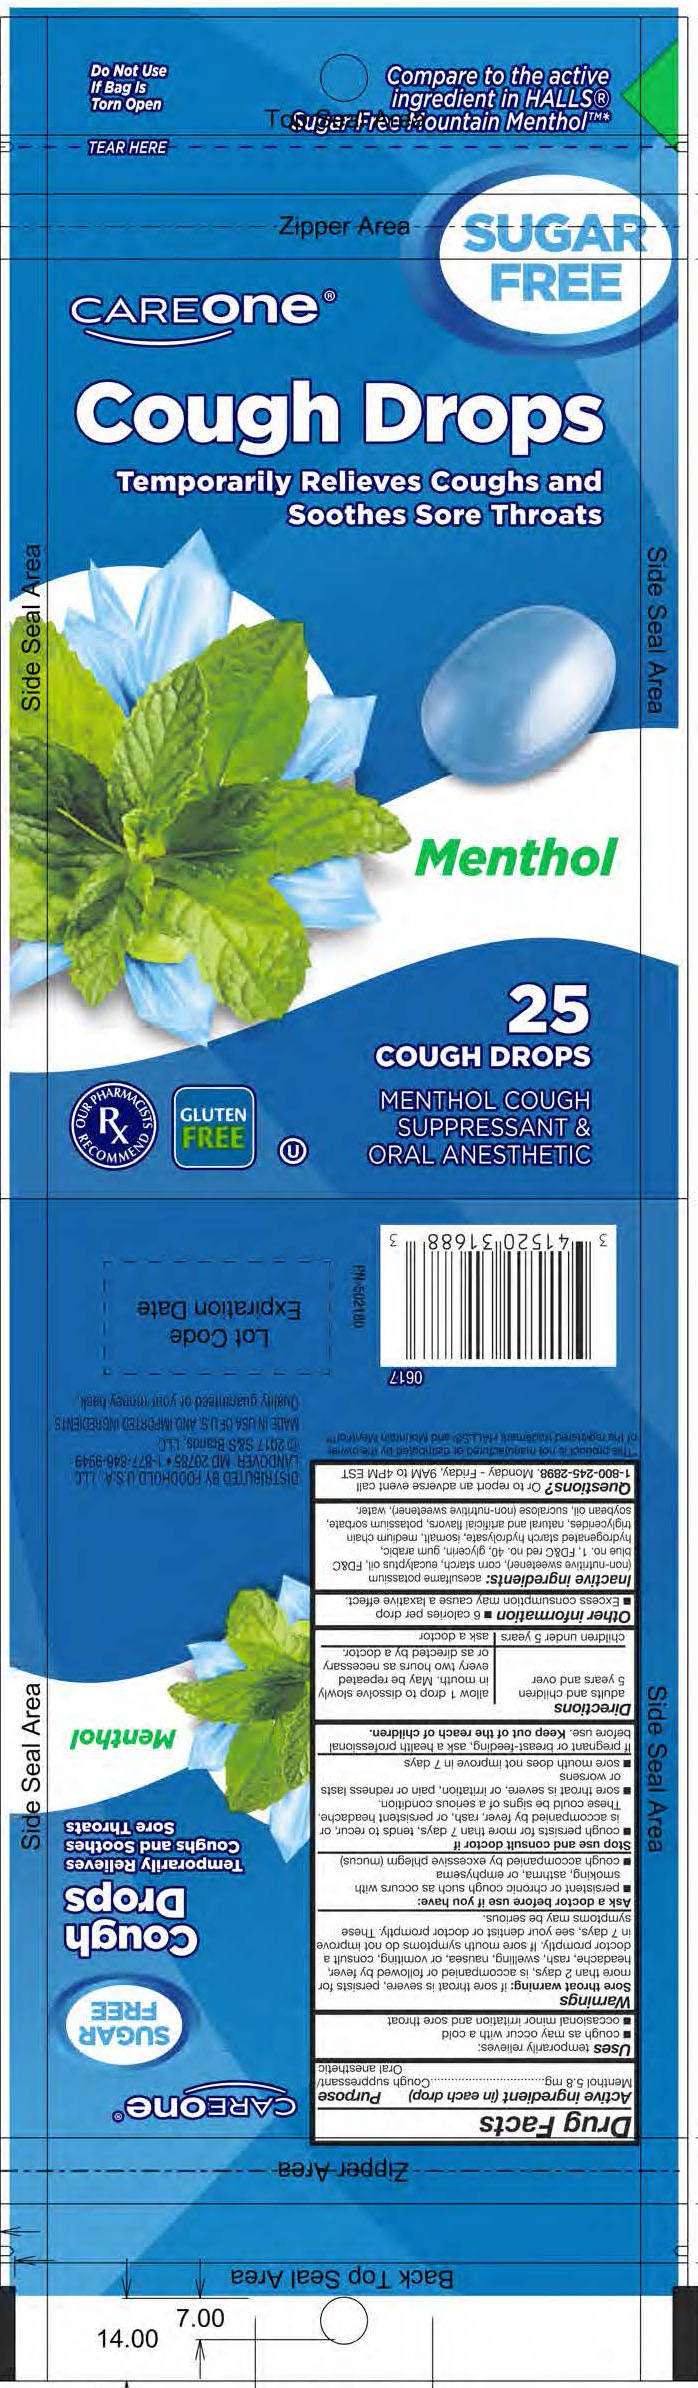 CareOne SF Menthol 25ct Cough Drops